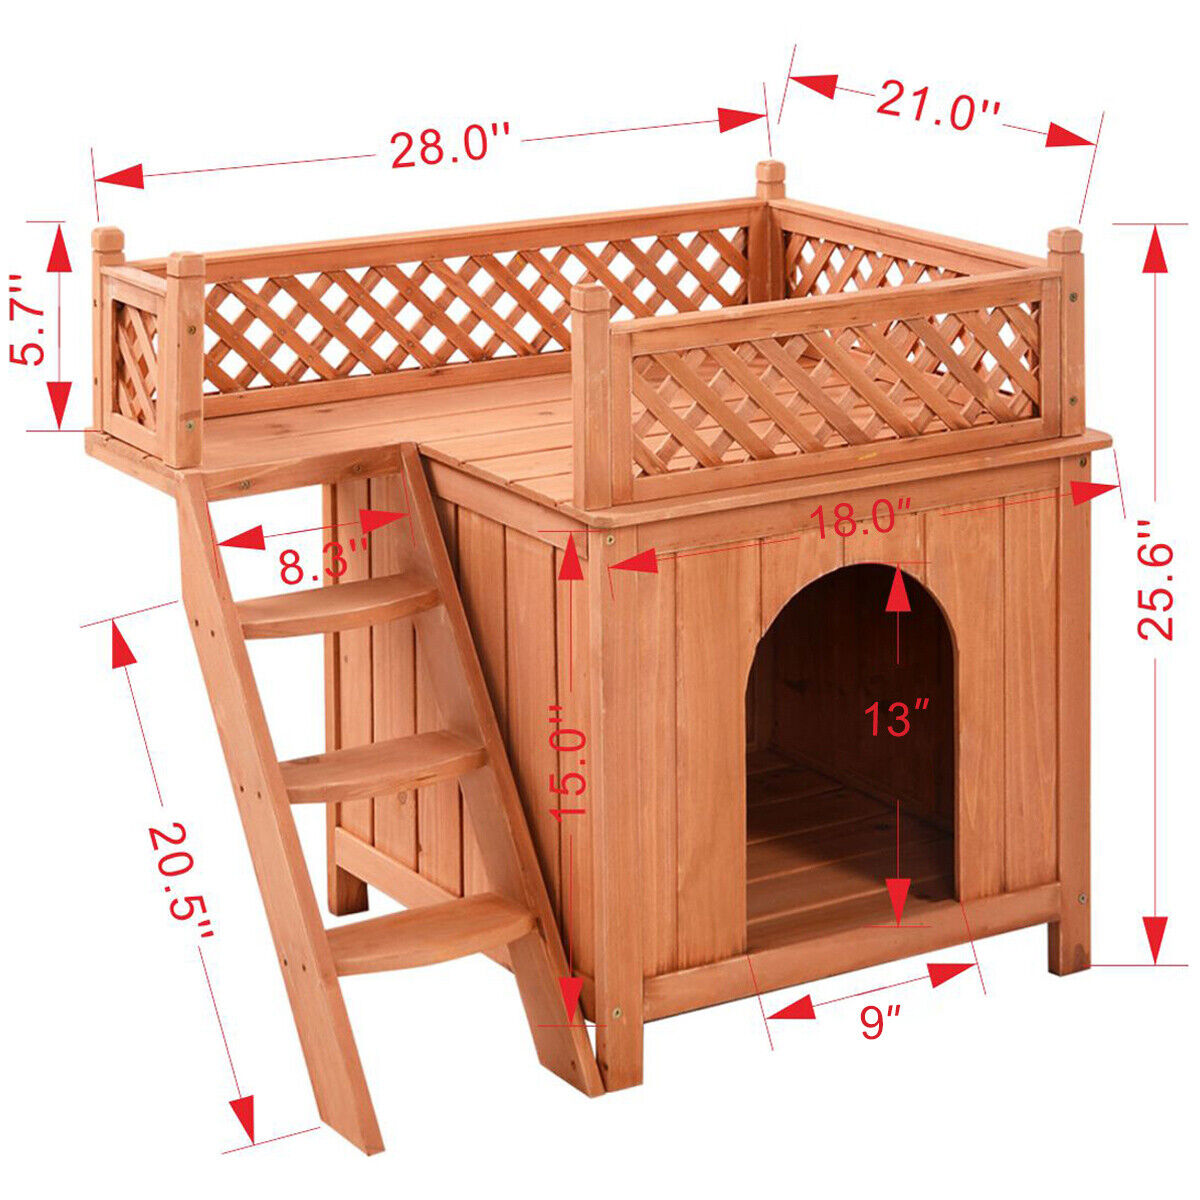 Costway Wooden Puppy Pet Dog House Wood Room In/outdoor Raised Roof Balcony Bed Shelter PS7391